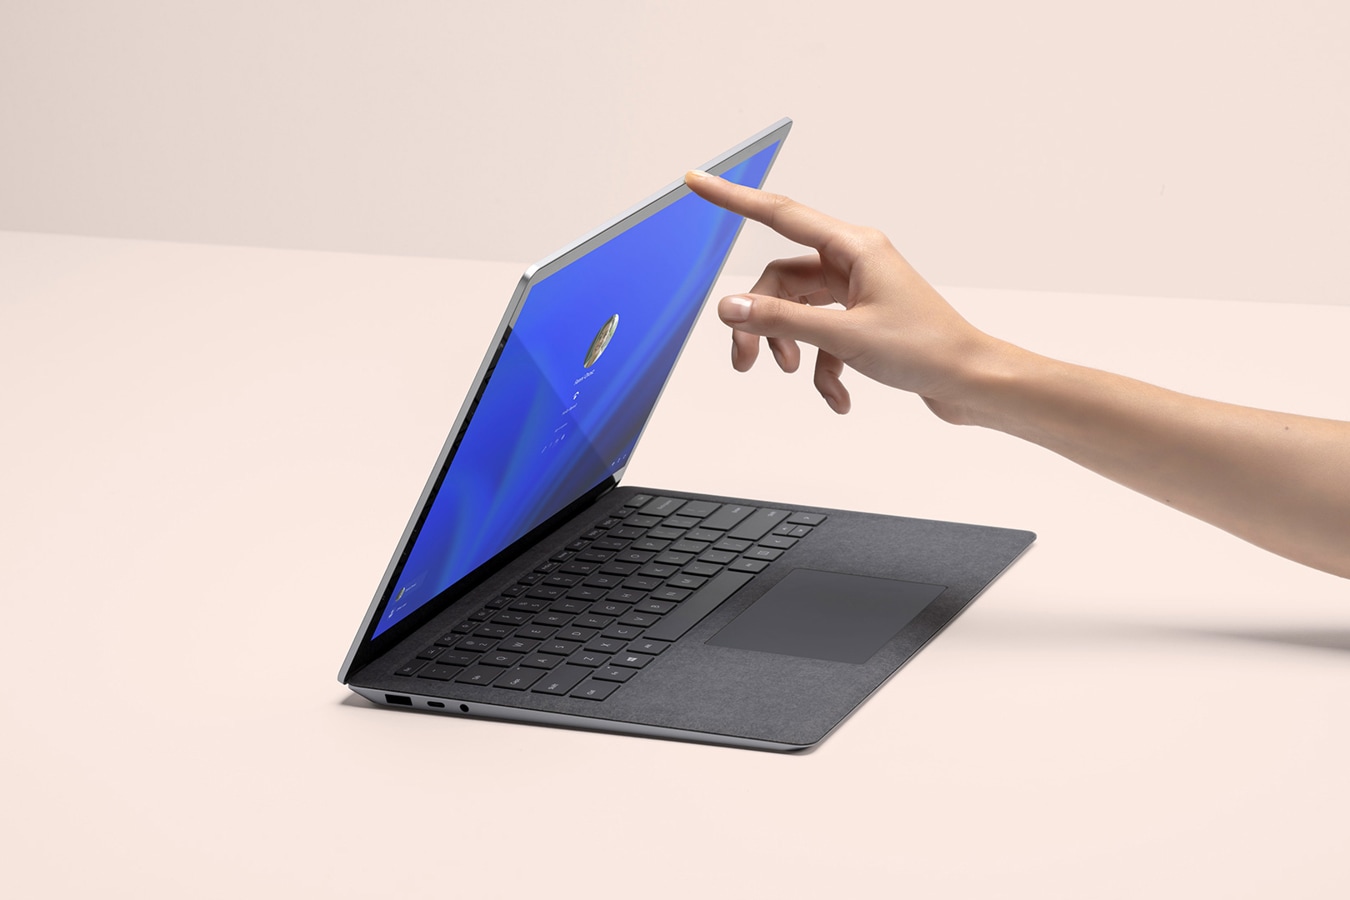 A person’s hand is shown lifting the lid of a Surface Laptop 4, with the sign on screen shown